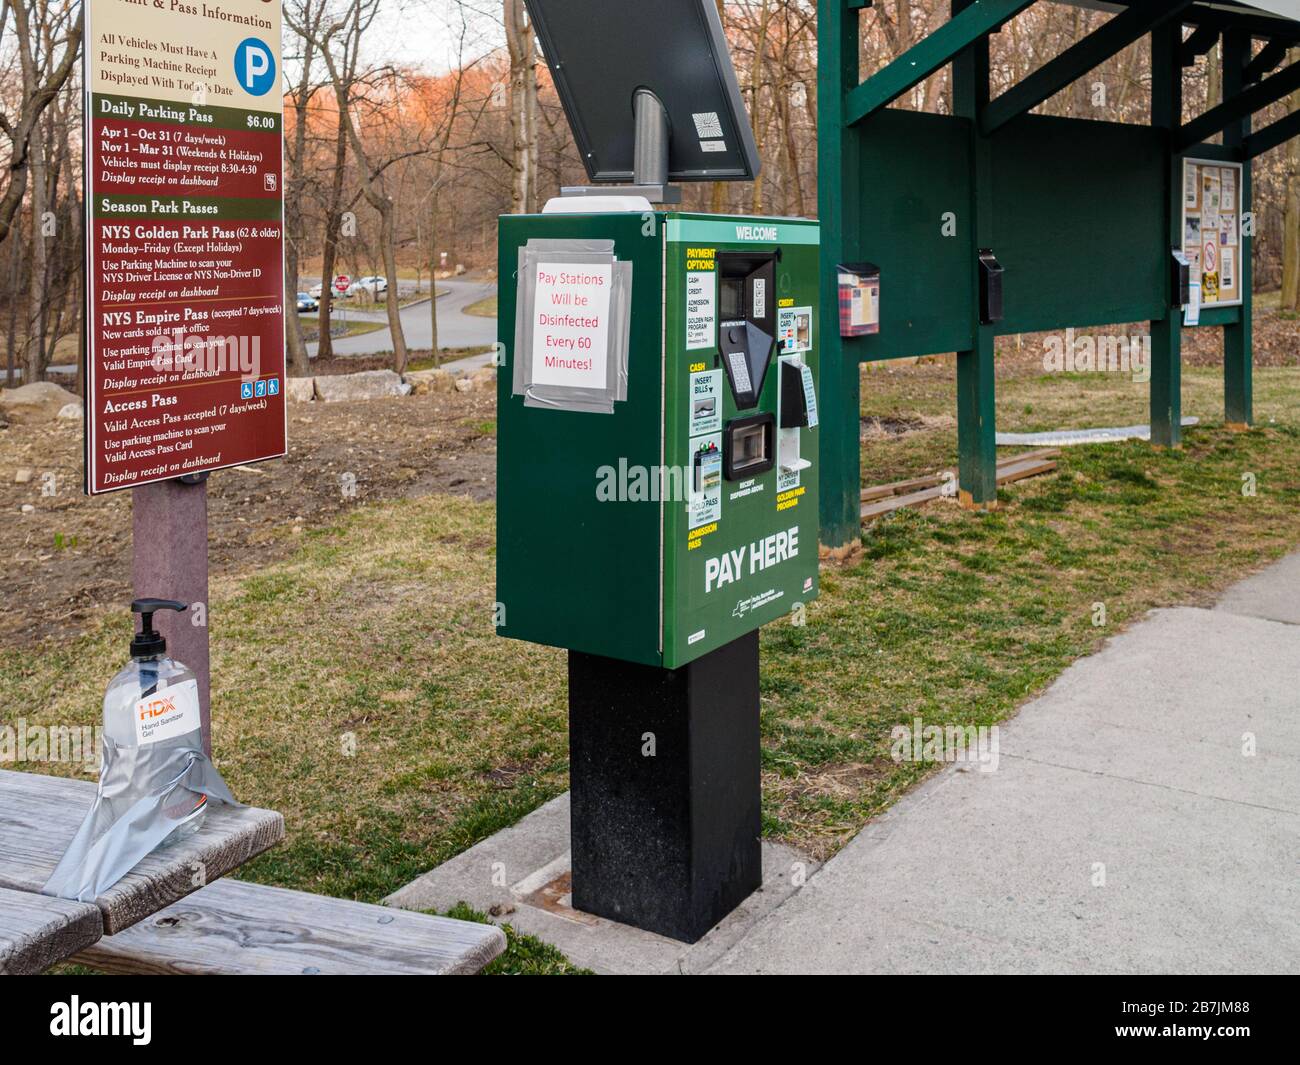 Westchester County, New York, 15 March, 2020: A bottle of hand sanitizer is secured by duck tape in the parking lot of Rockefeller State Park Preserve for hikers. Sign that parking meter is disinfected hourly over coronavirus fears. Westchester County currently has the highest incidence of COVID-19 in the state.  Due to shortages, there have been reports of people stealing hand sanitizer from offices and other public spaces. Stock Photo